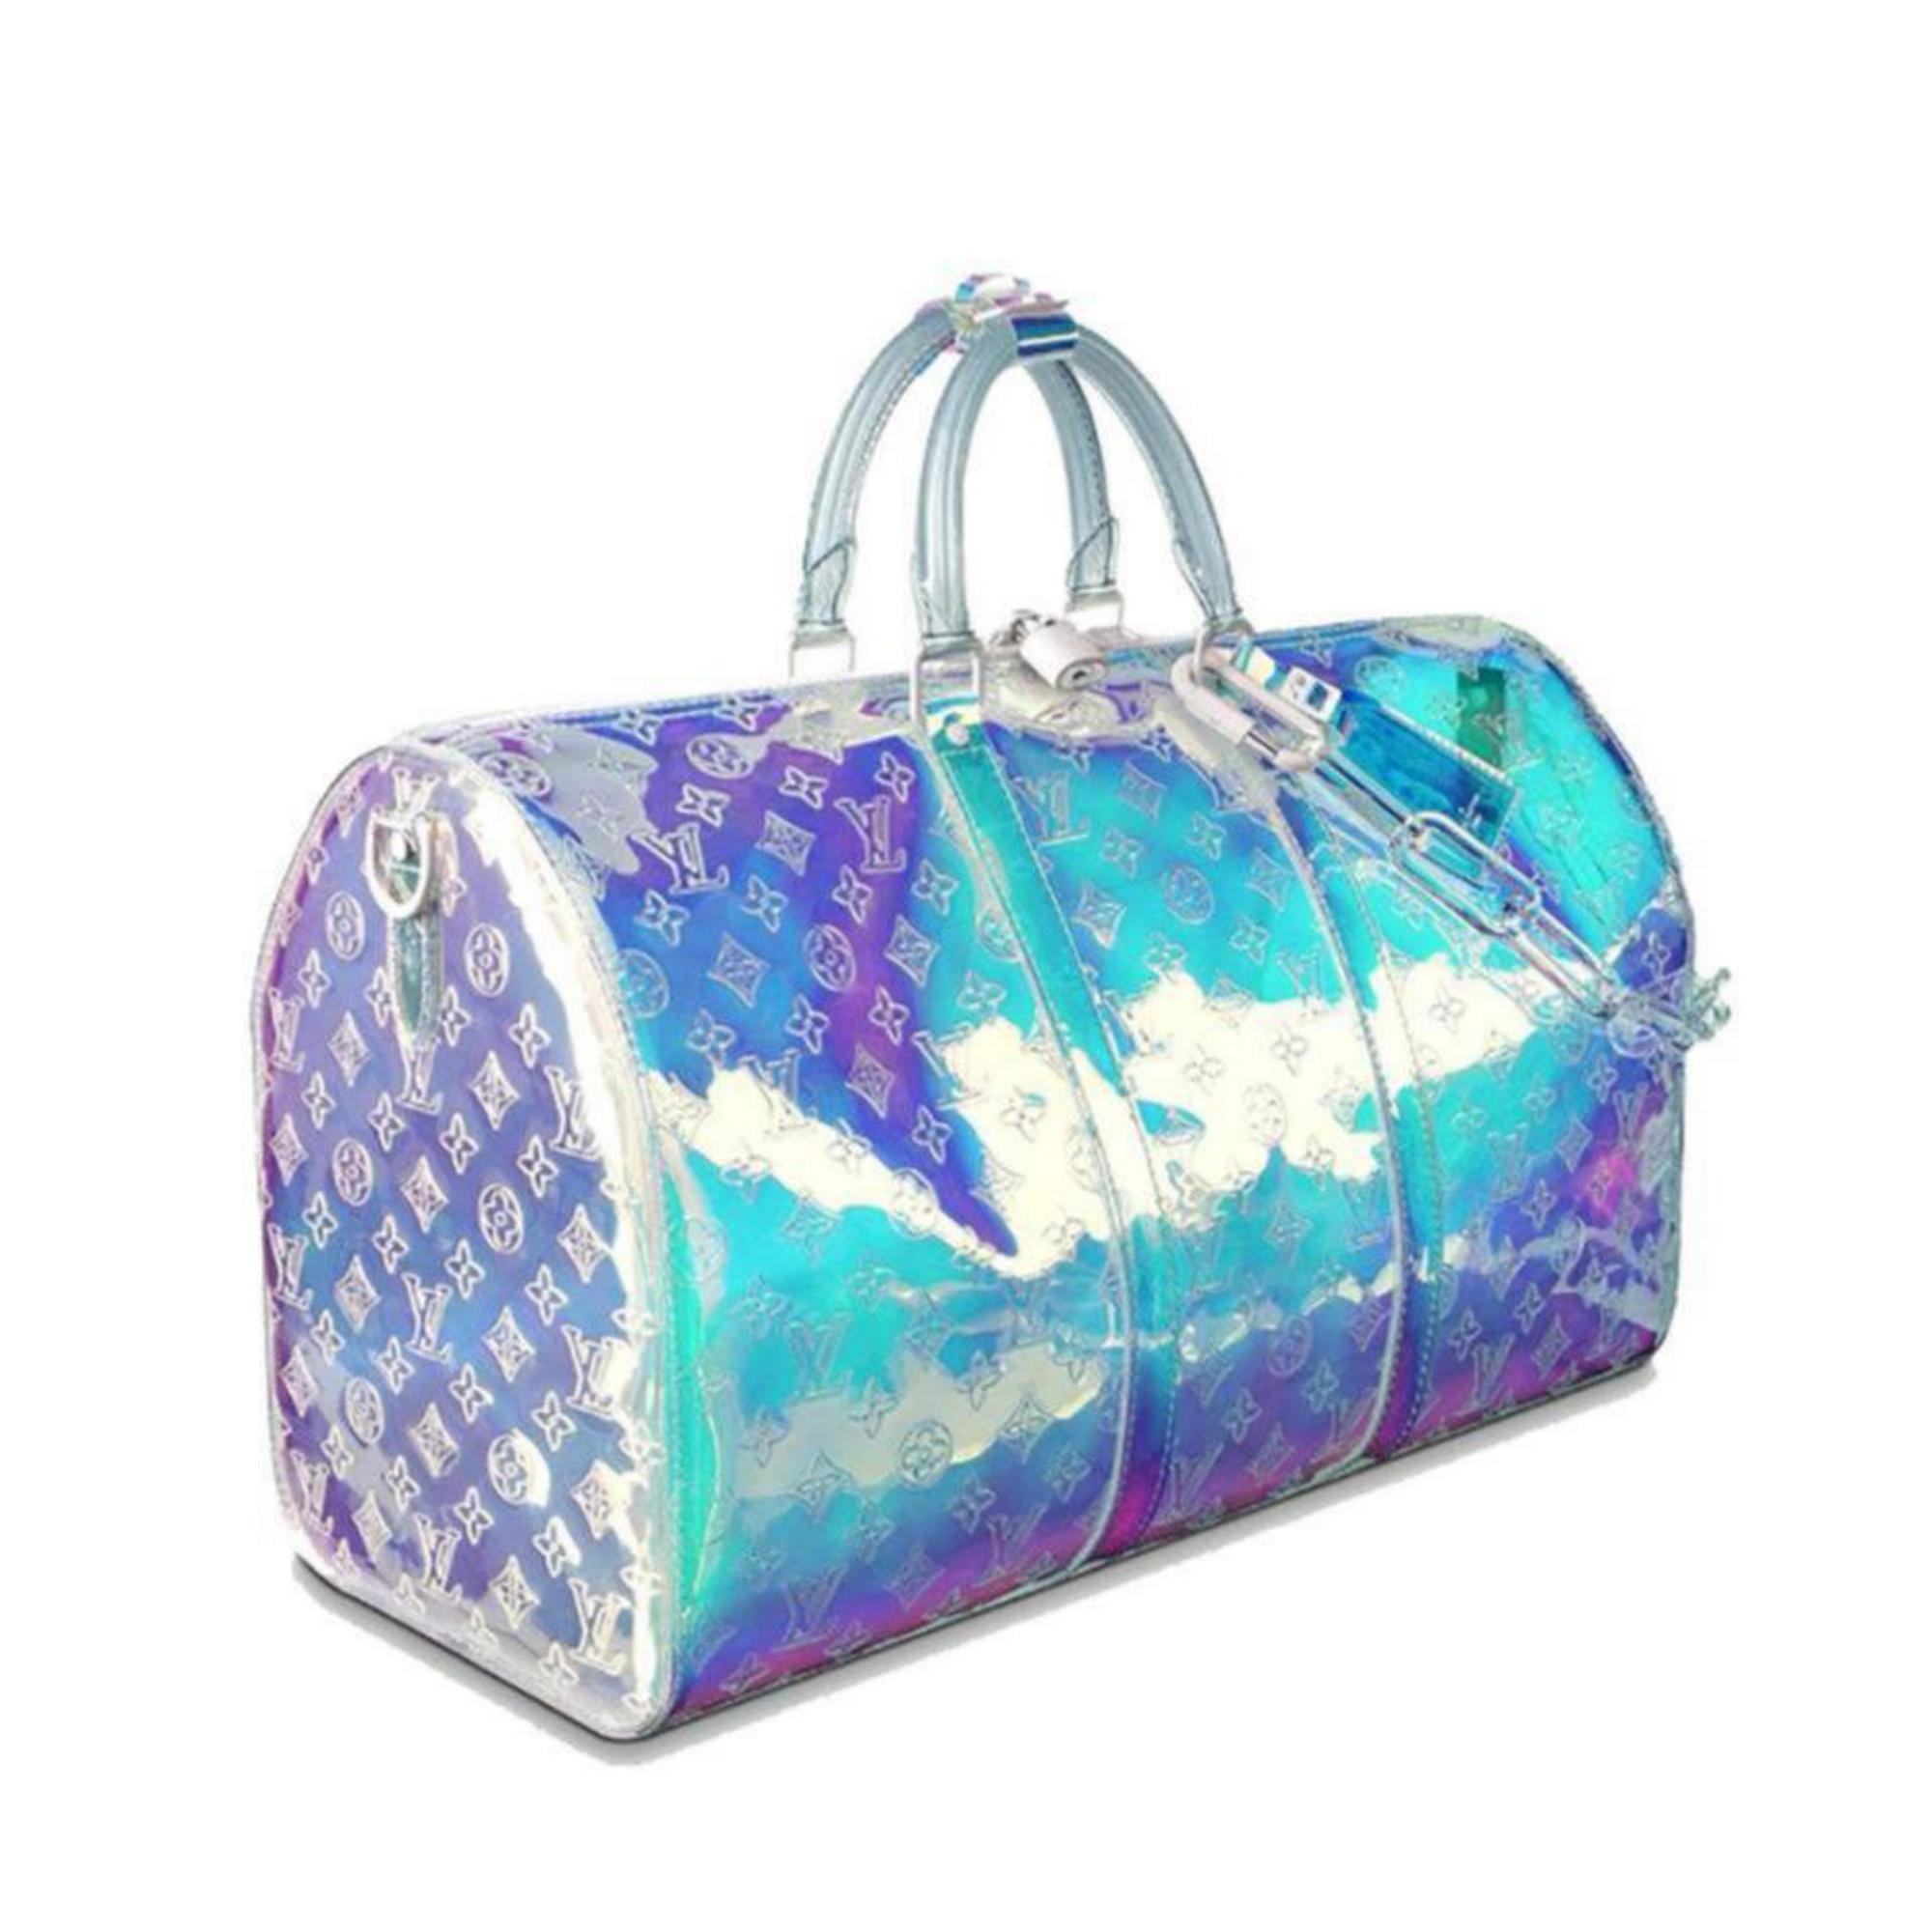 BRAND NEW
(10/10 or N)
Only touched for photography,
Includes Lock, Key, Chain strap and Dust Bag
One of the most highly sought after pieces from Virgil Abloh's men's SS19 collection, this holographic coated keepall is already a cult